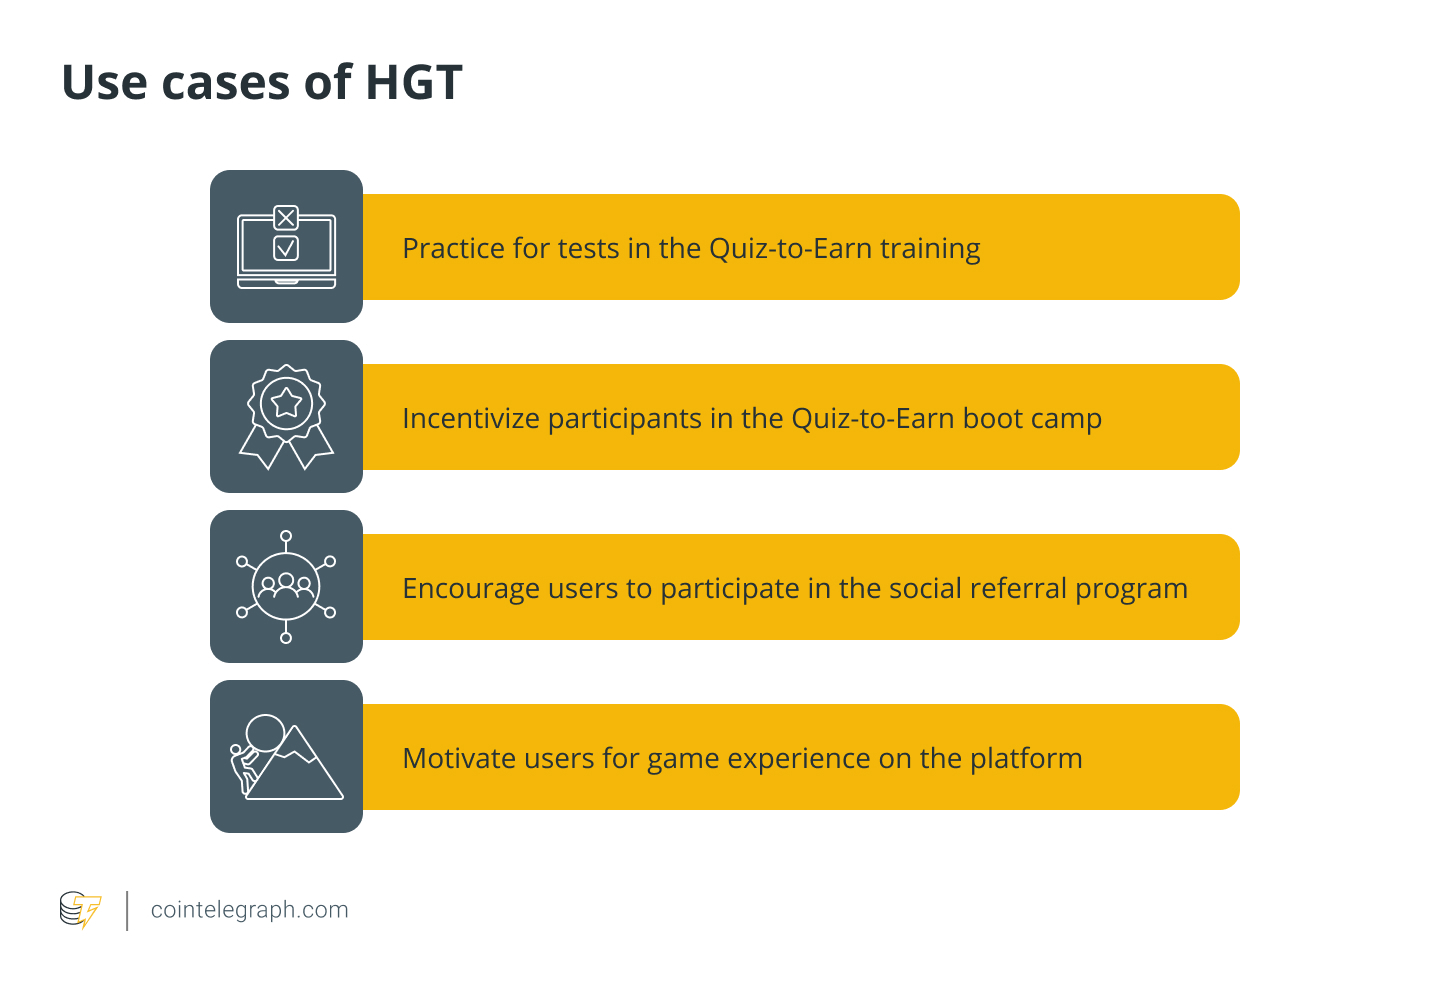 Use cases of HGT